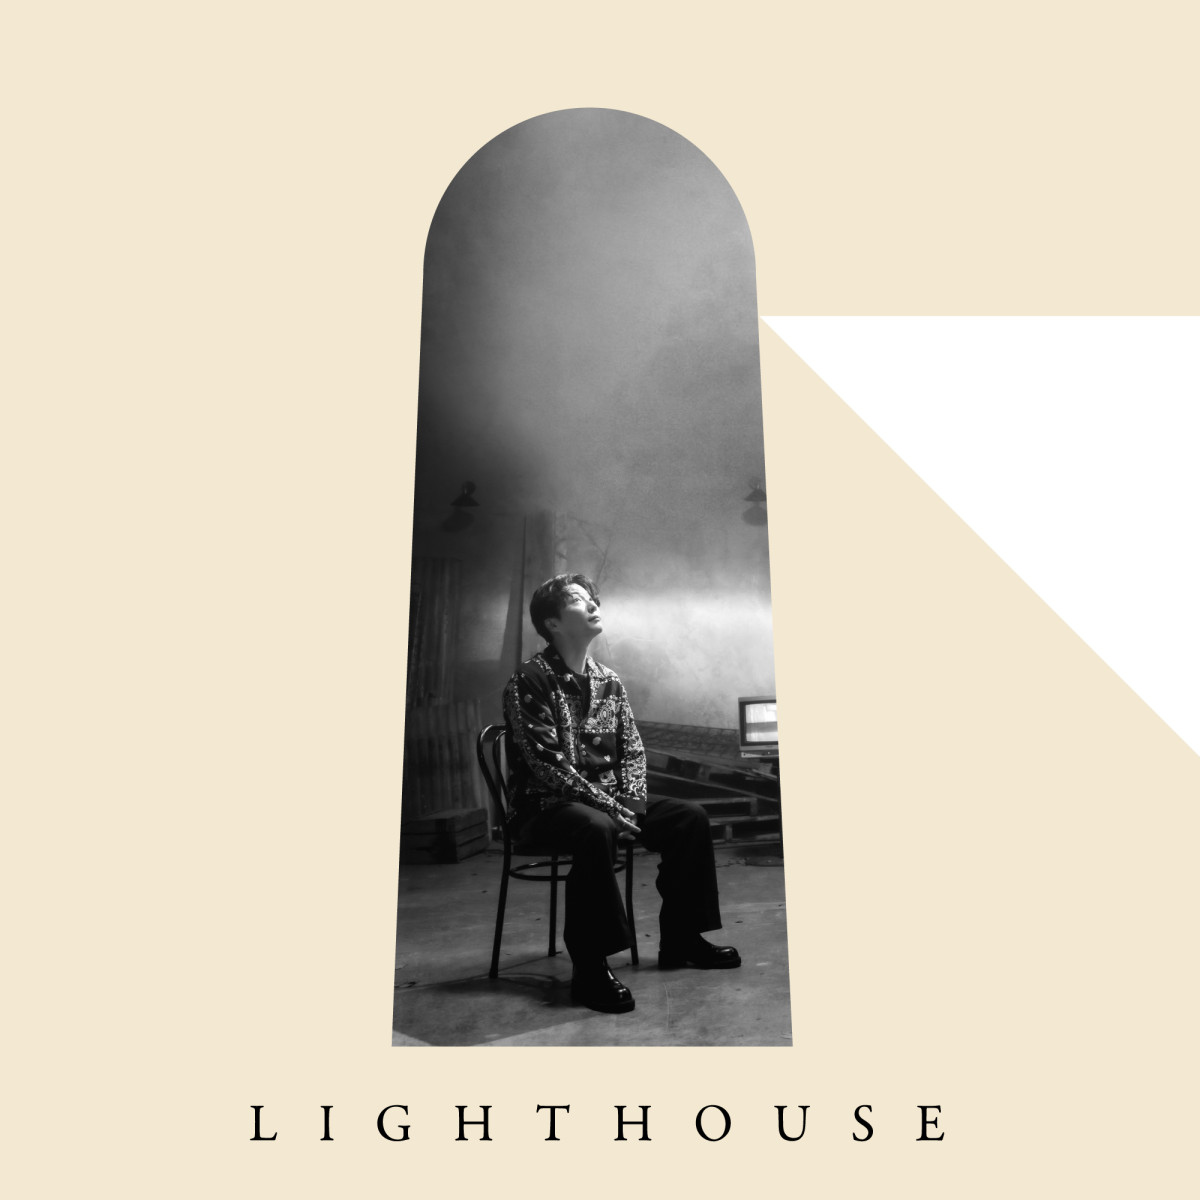 Gen’s newest EP “LIGHTHOUSE” Out now!